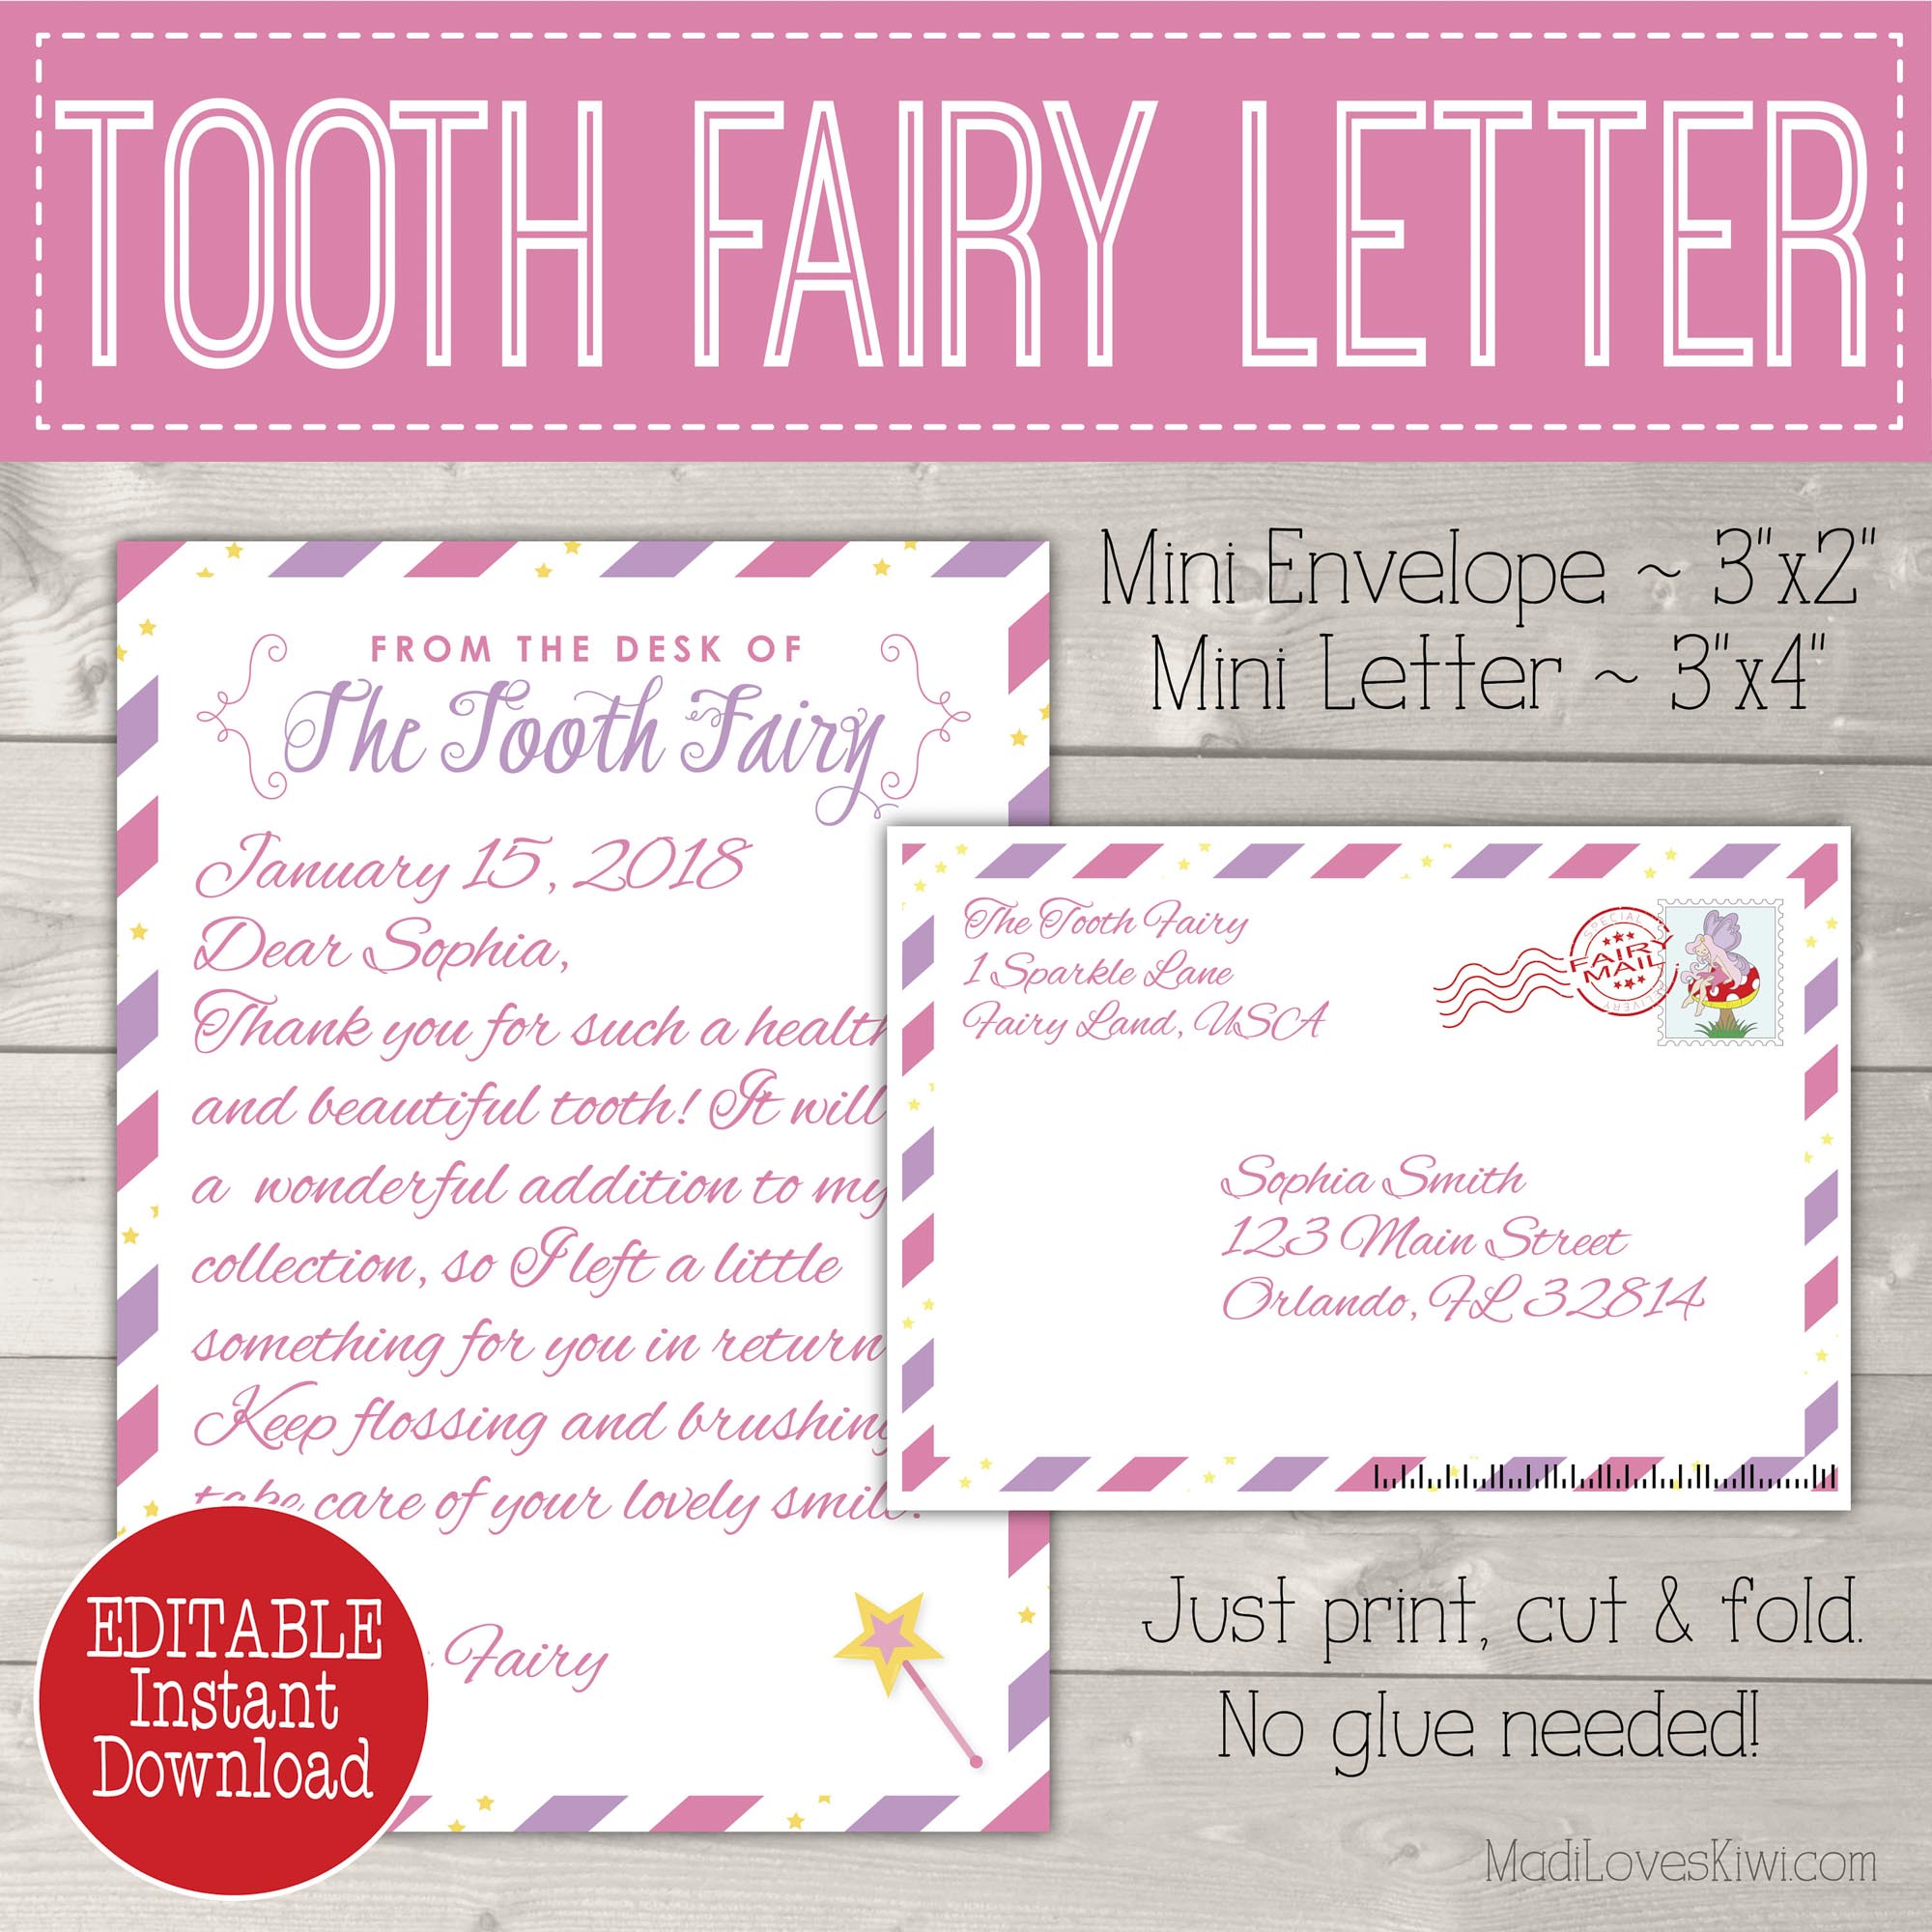 cute-tooth-fairy-letter-for-boys-cassie-smallwood-printable-pdf-tooth-fairy-letter-tooth-fairy